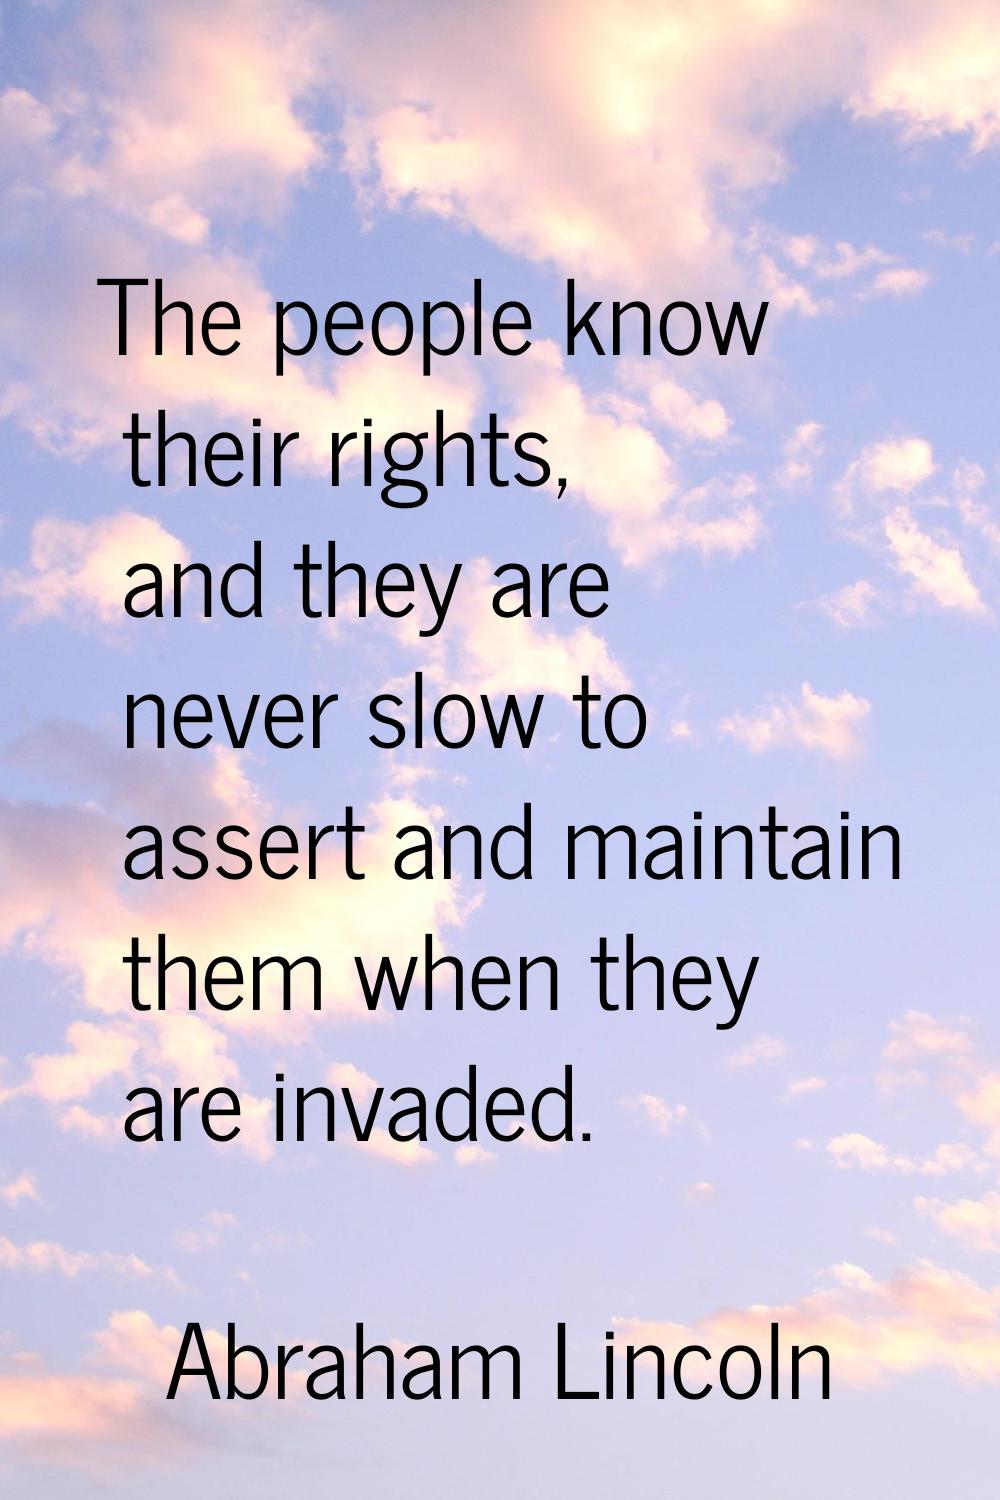 The people know their rights, and they are never slow to assert and maintain them when they are inv